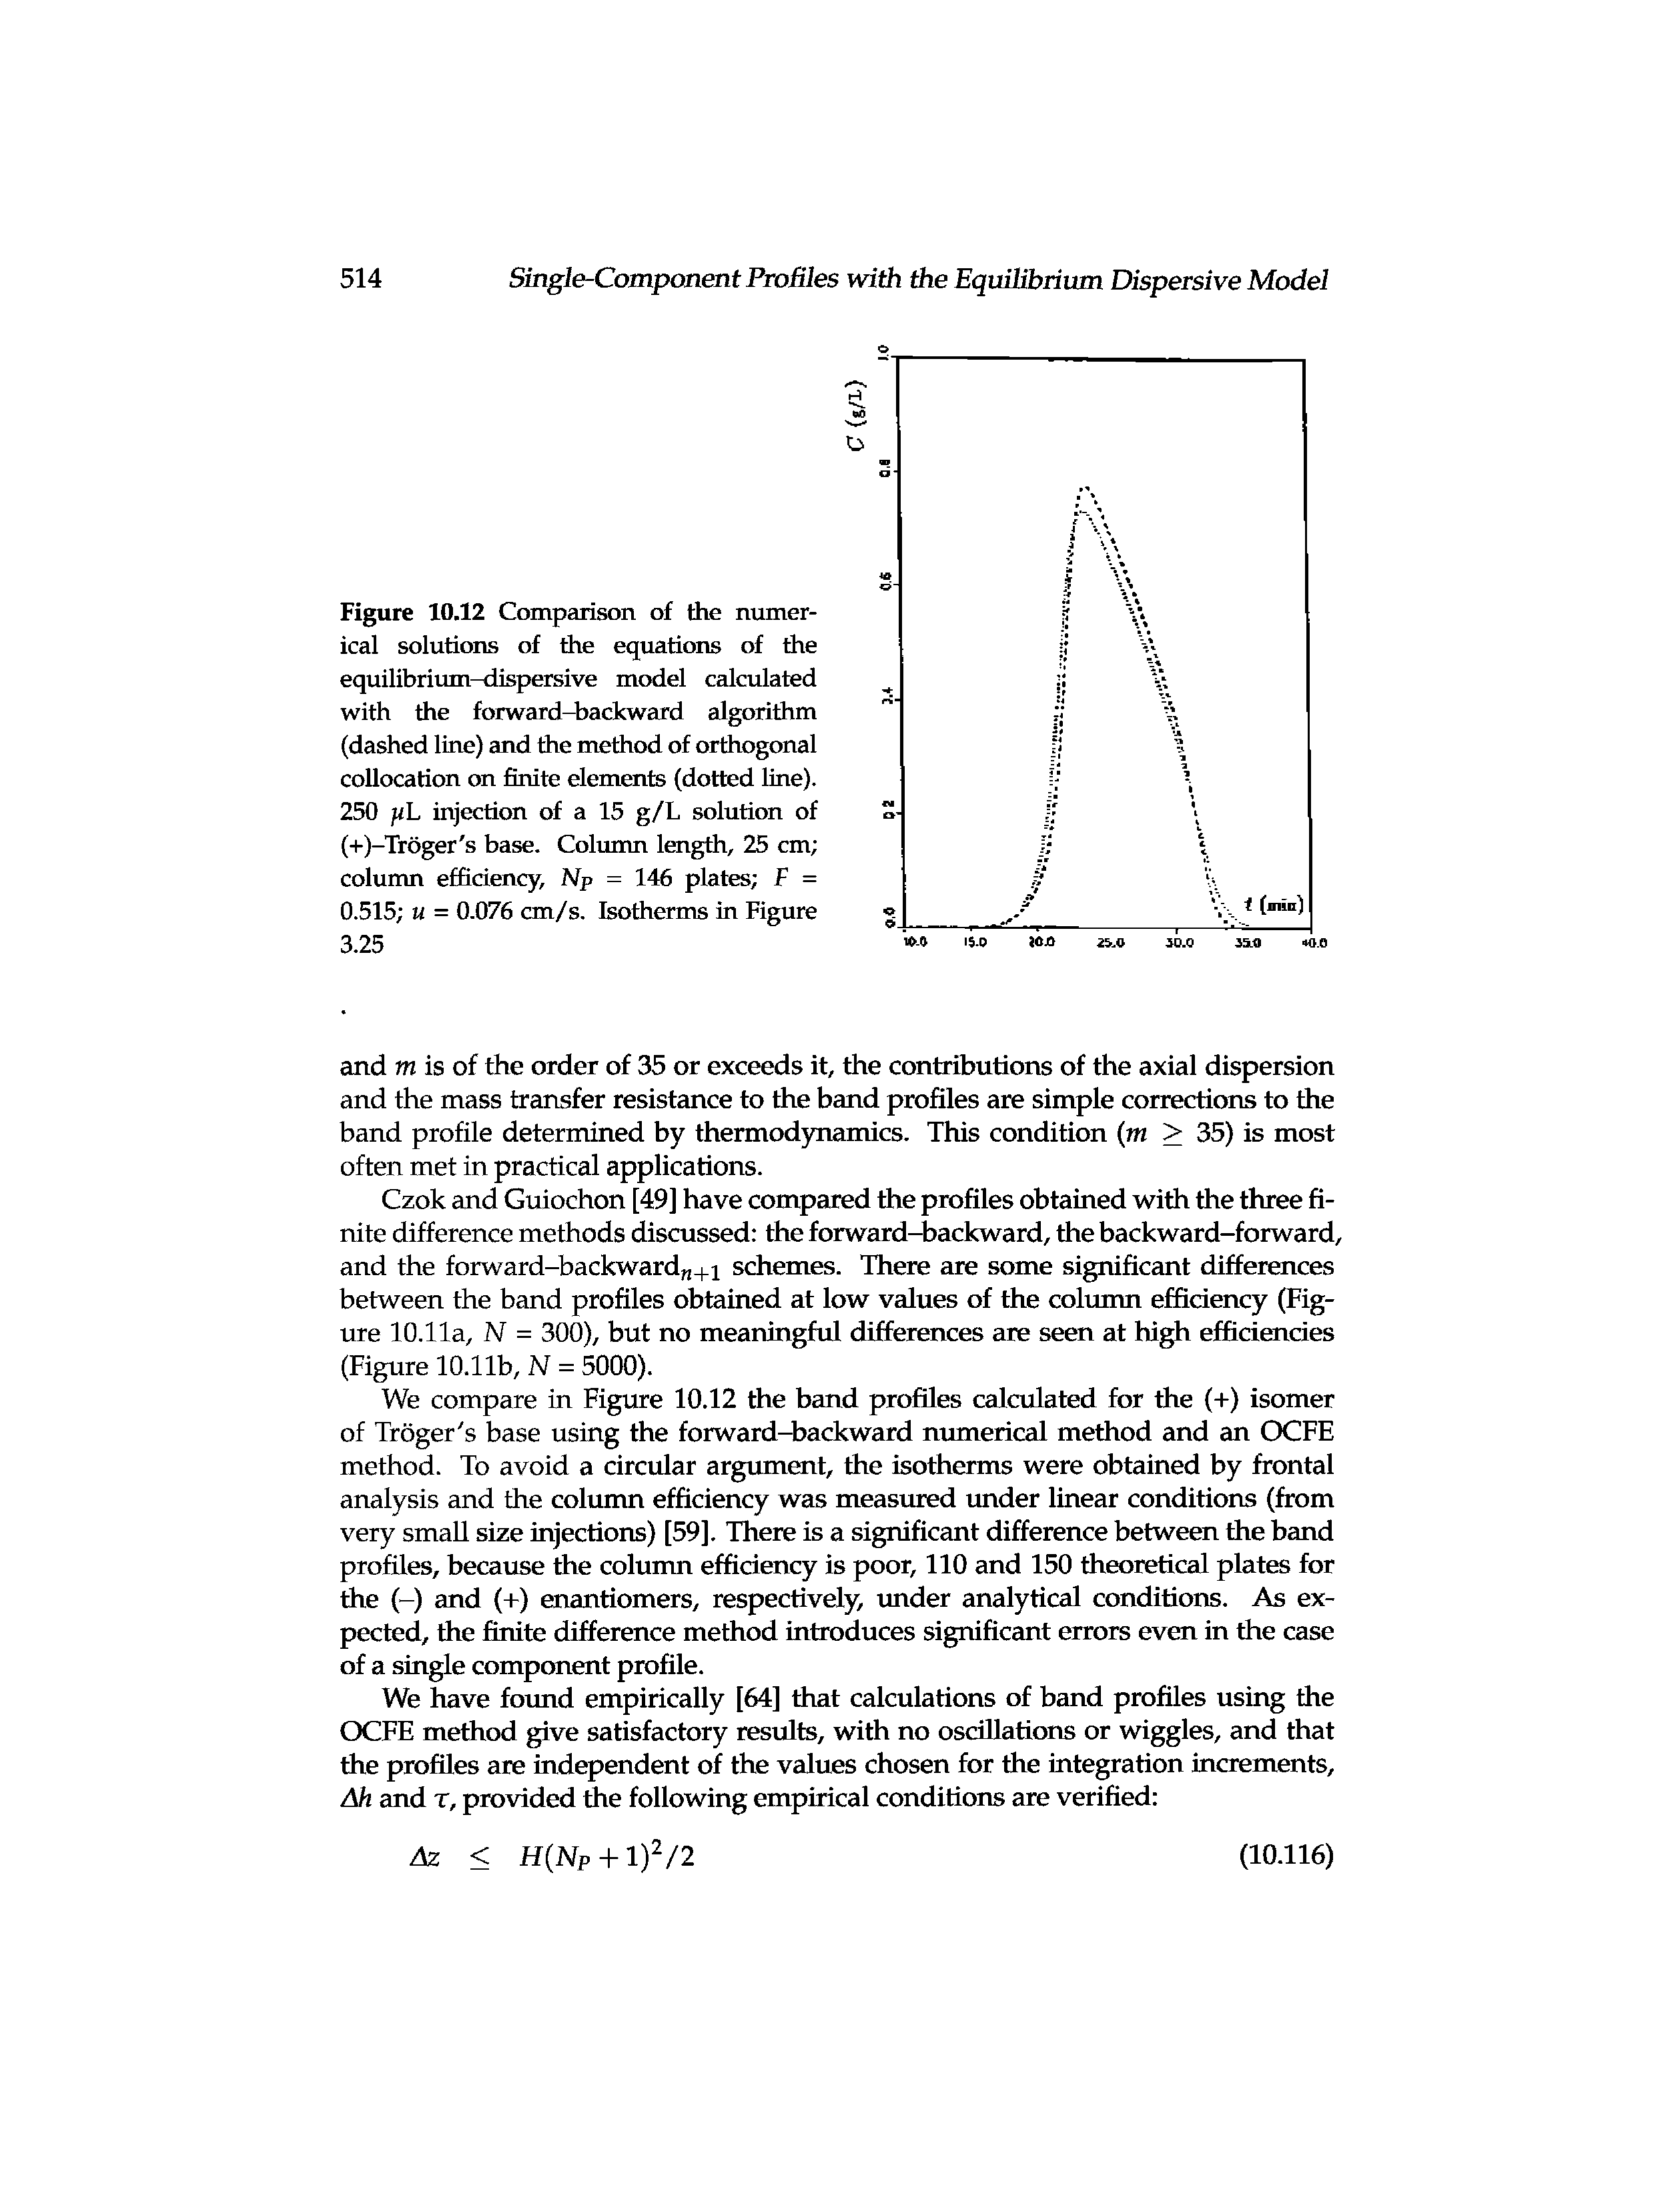 Figure 10.12 Comparison of the numerical solutions of the equations of the equilibrium-dispersive model calculated with the forward-backward algorithm (dashed line) and the method of orthogonal collocation on finite elements (dotted line). 250 iL injection of a 15 g/L solution of (+)-Tr6ger s base. Column length, 25 cm column efficiency, Np = 146 plates F = 0.515 u = 0.076 cm/s. Isotherms in Figure 3.25...